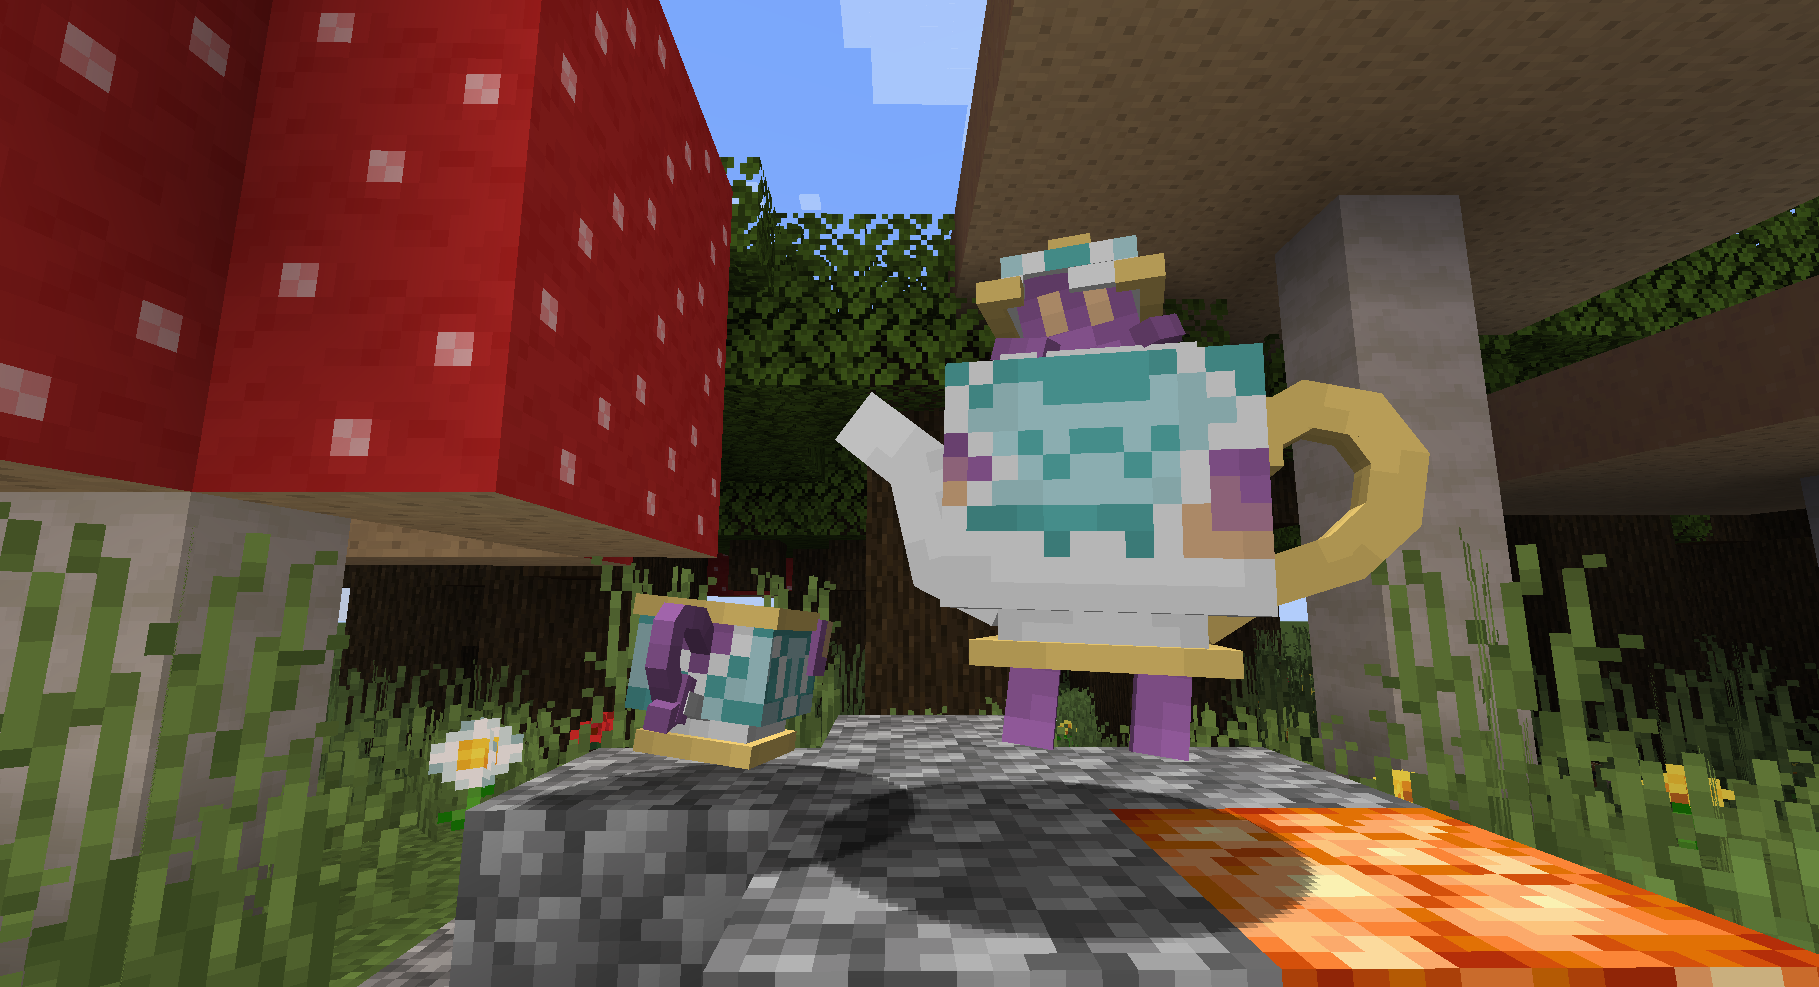 Finding Spiritomb in Minecraft… in an Ancient City (Cobblemon